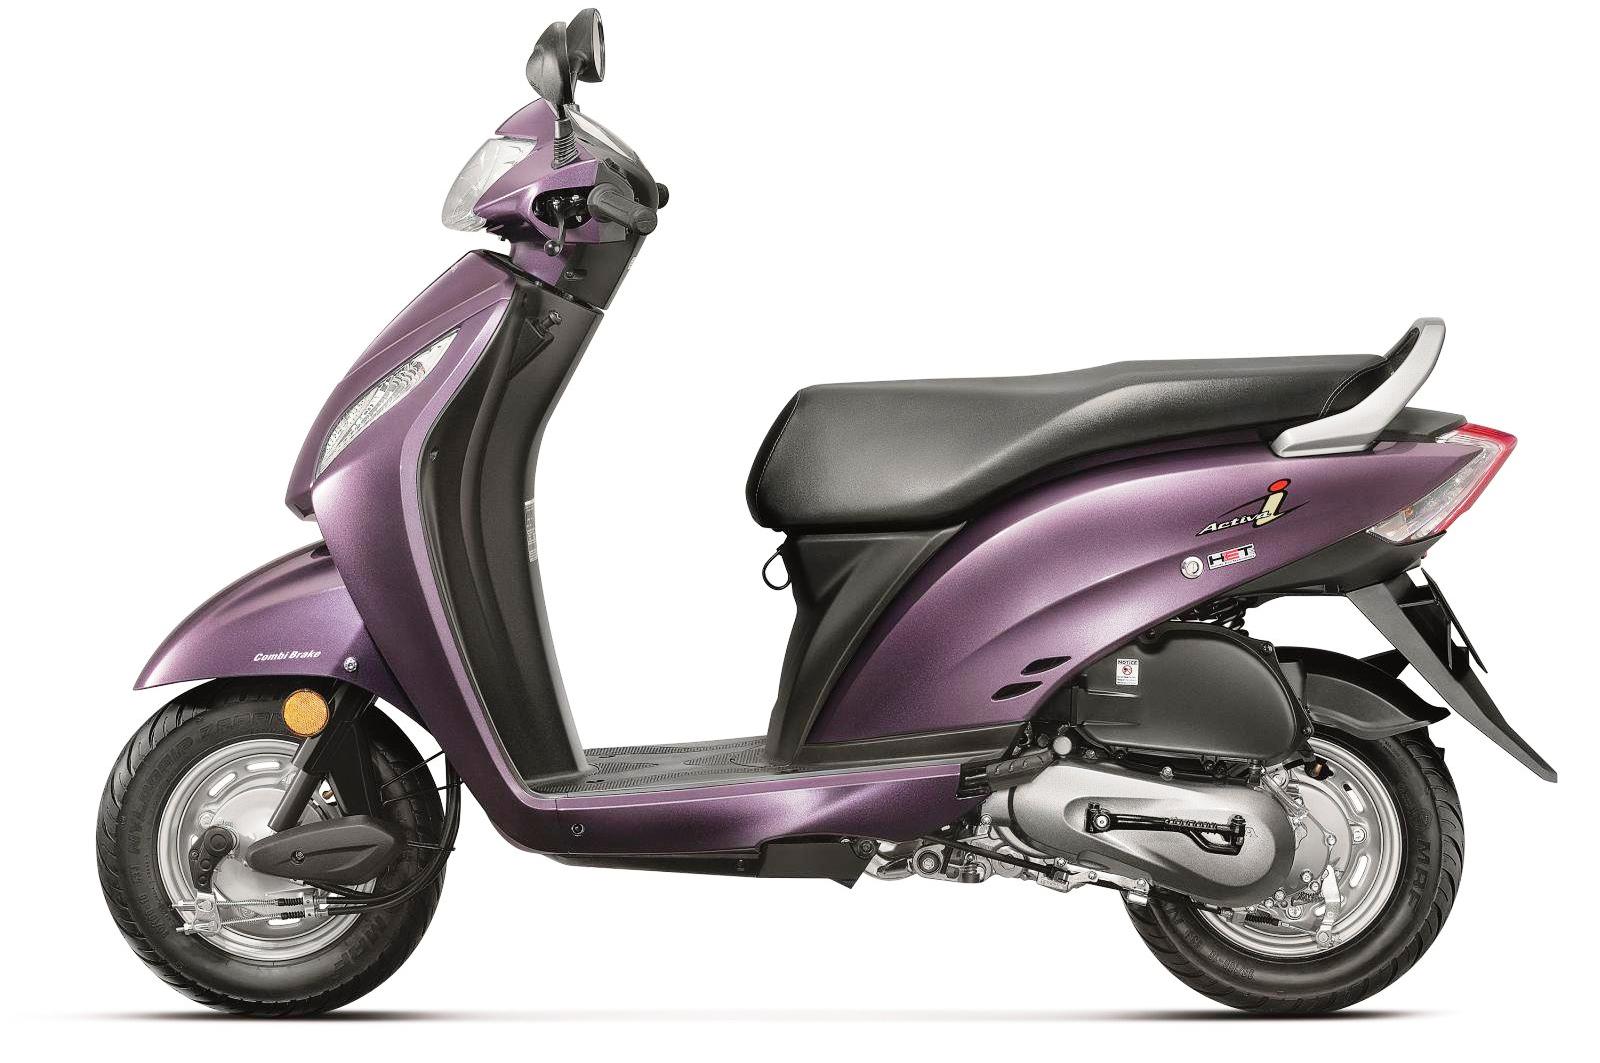 Honda Activa i Images Wallpapers and Photos